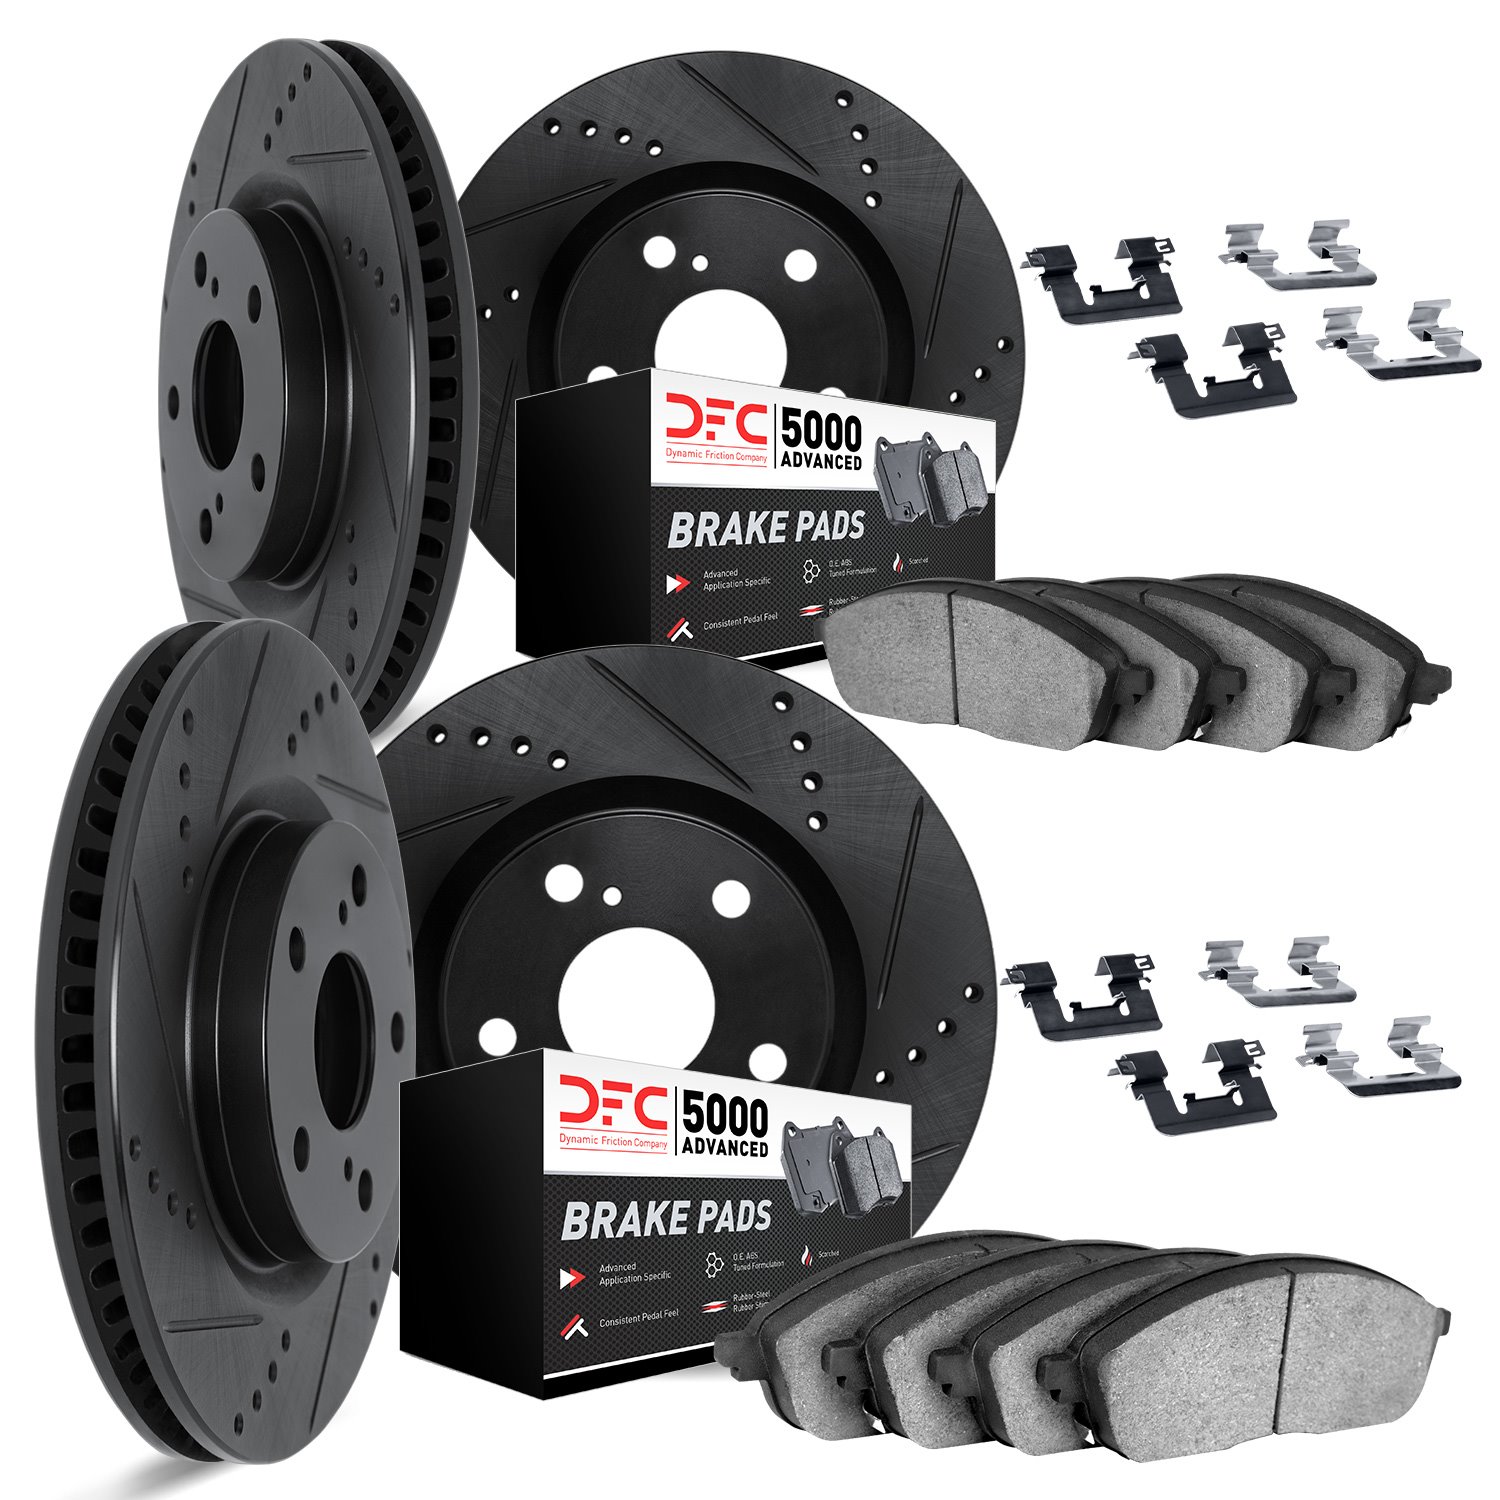 8514-31022 Drilled/Slotted Brake Rotors w/5000 Advanced Brake Pads Kit & Hardware [Black], 2010-2015 BMW, Position: Front and Re